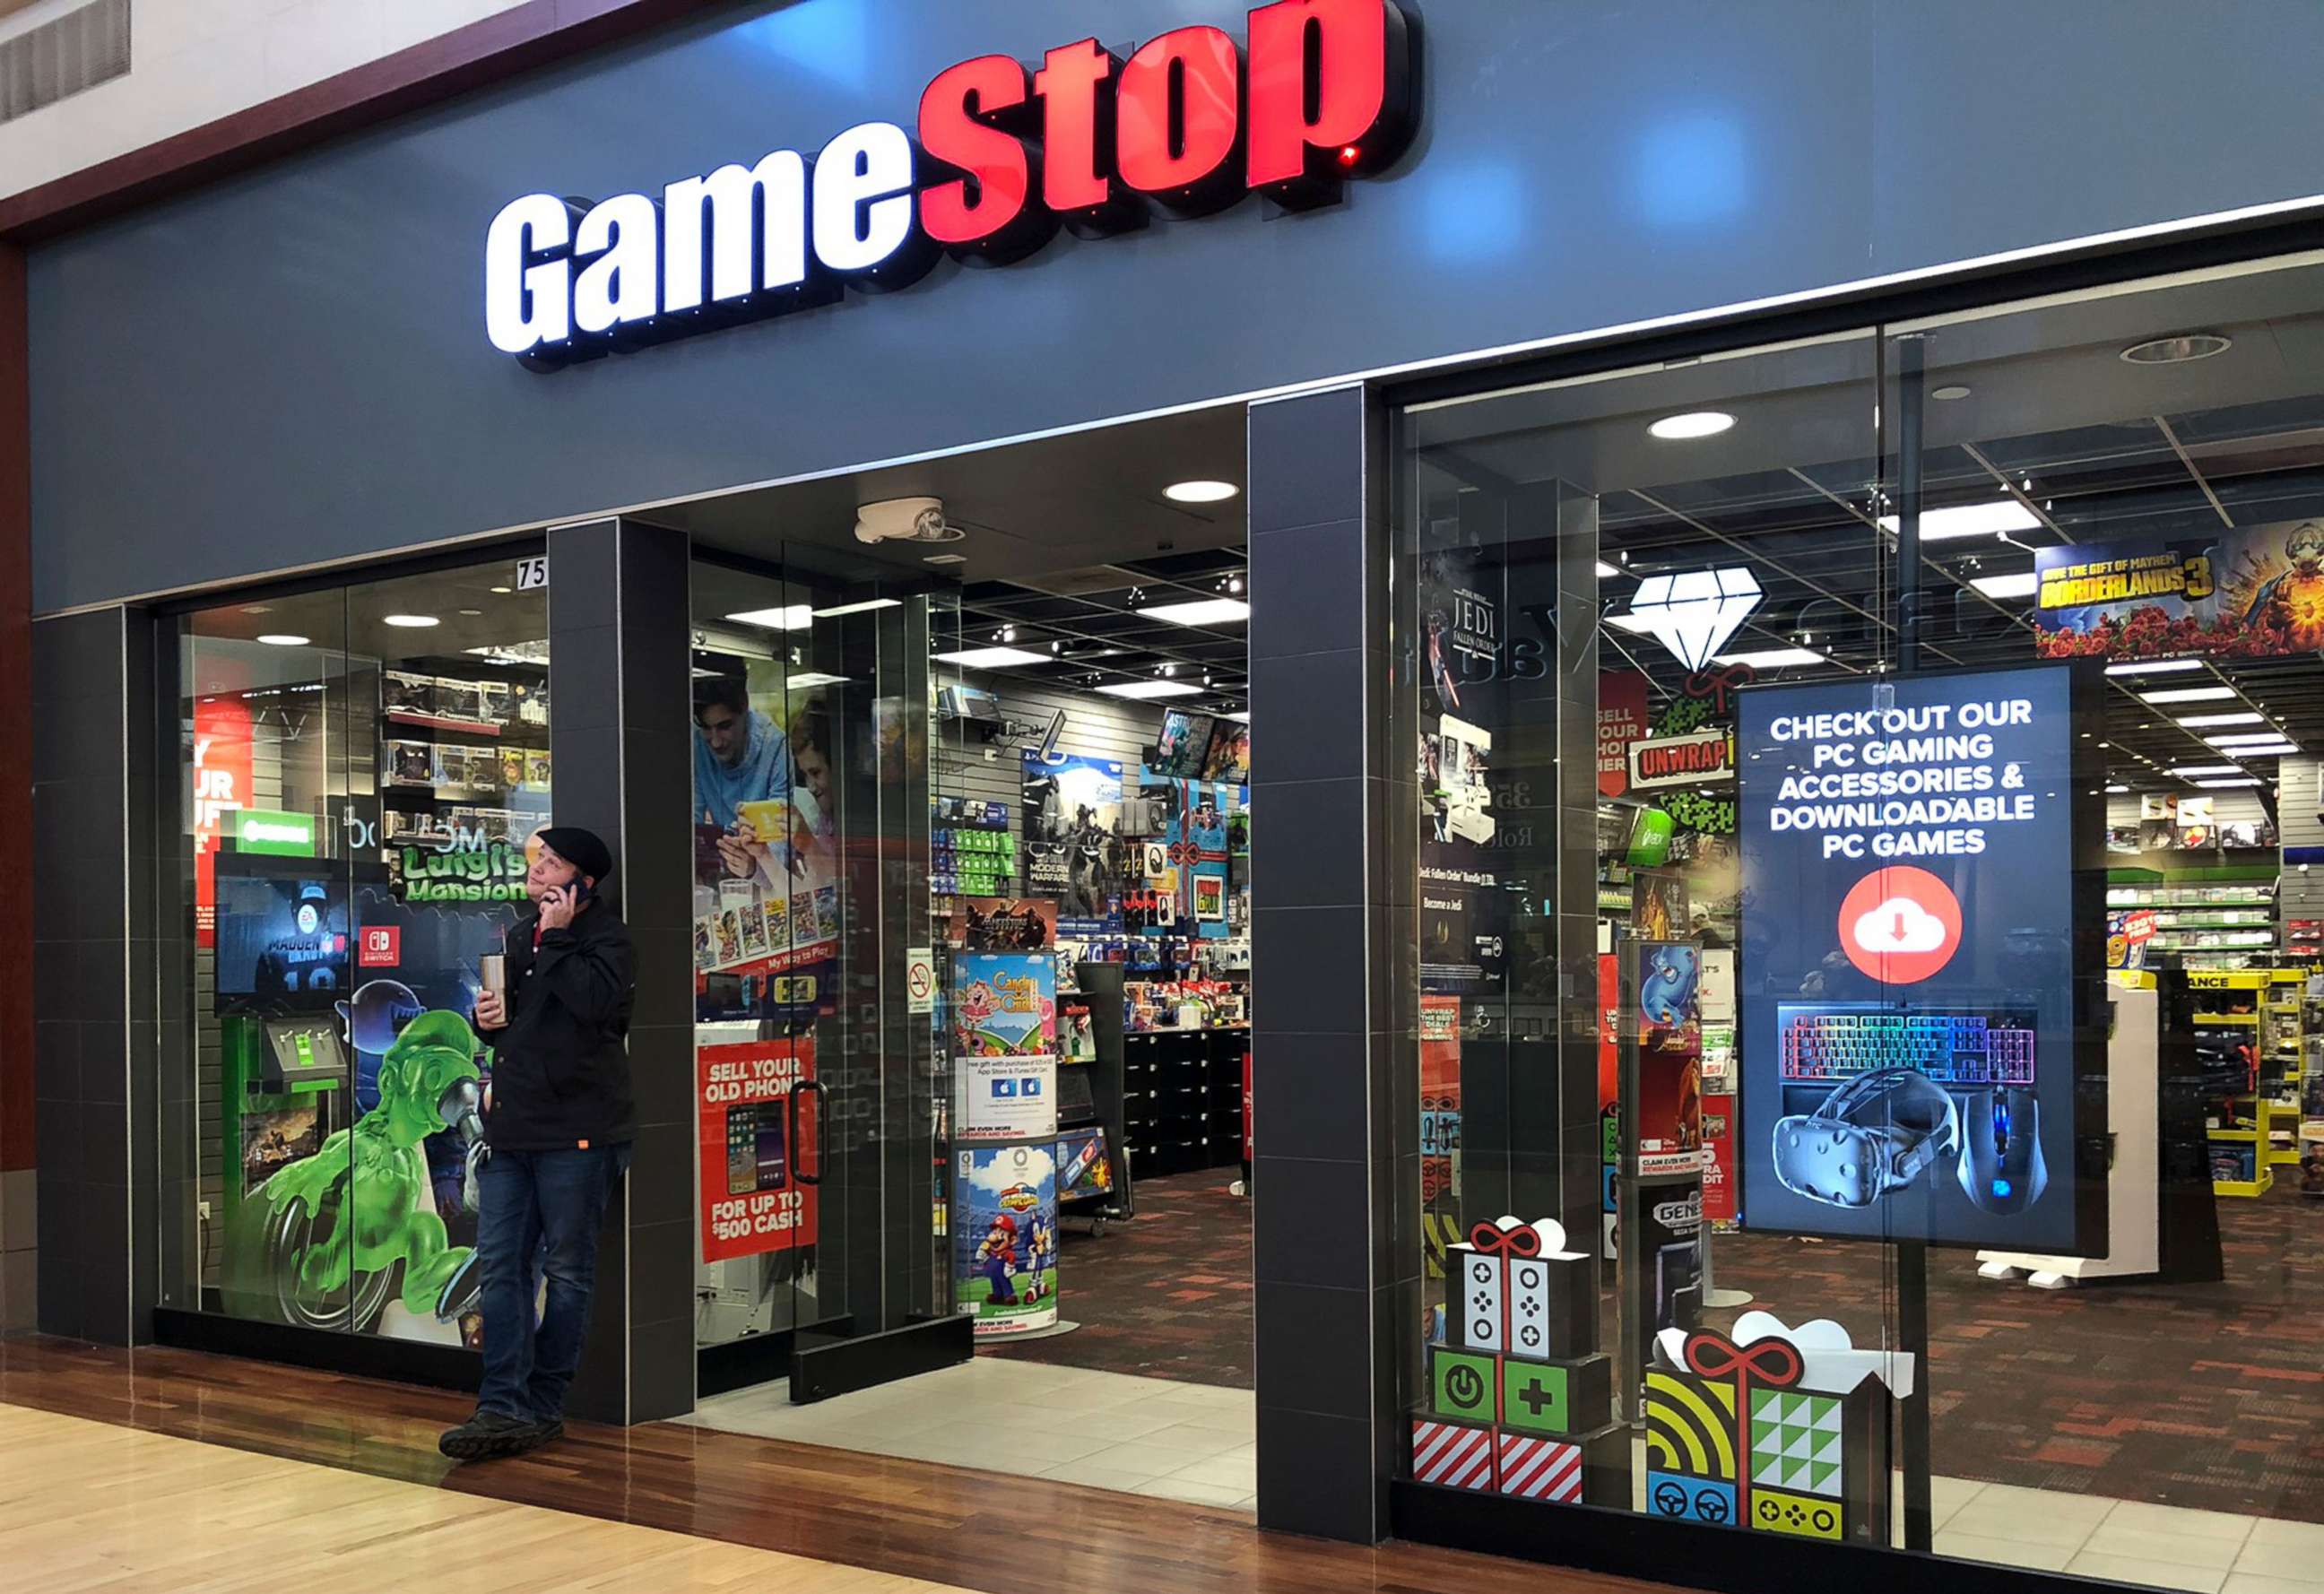 Robinhood nearly defaulted during the GameStop short squeeze